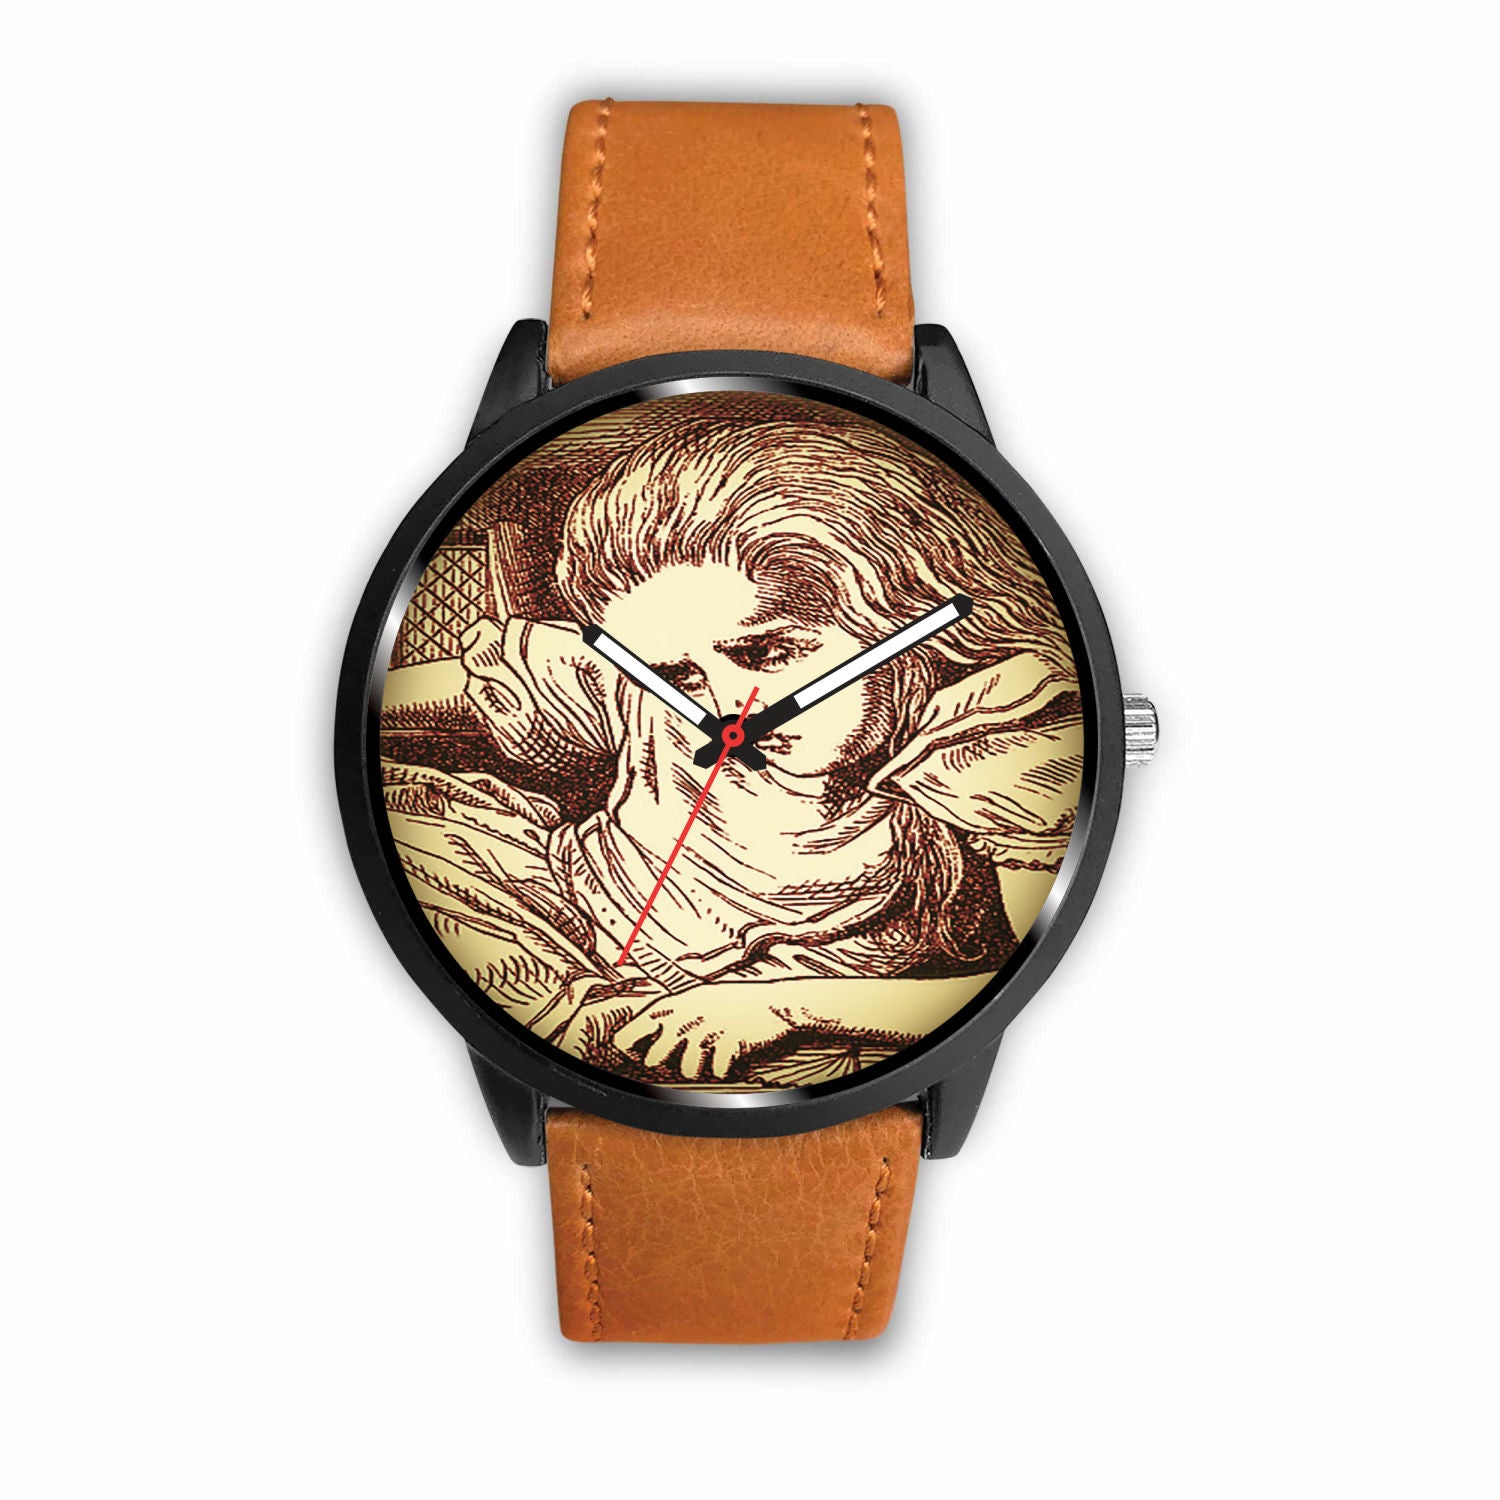 Limited Edition Vintage Inspired Custom Watch Alice 10.22